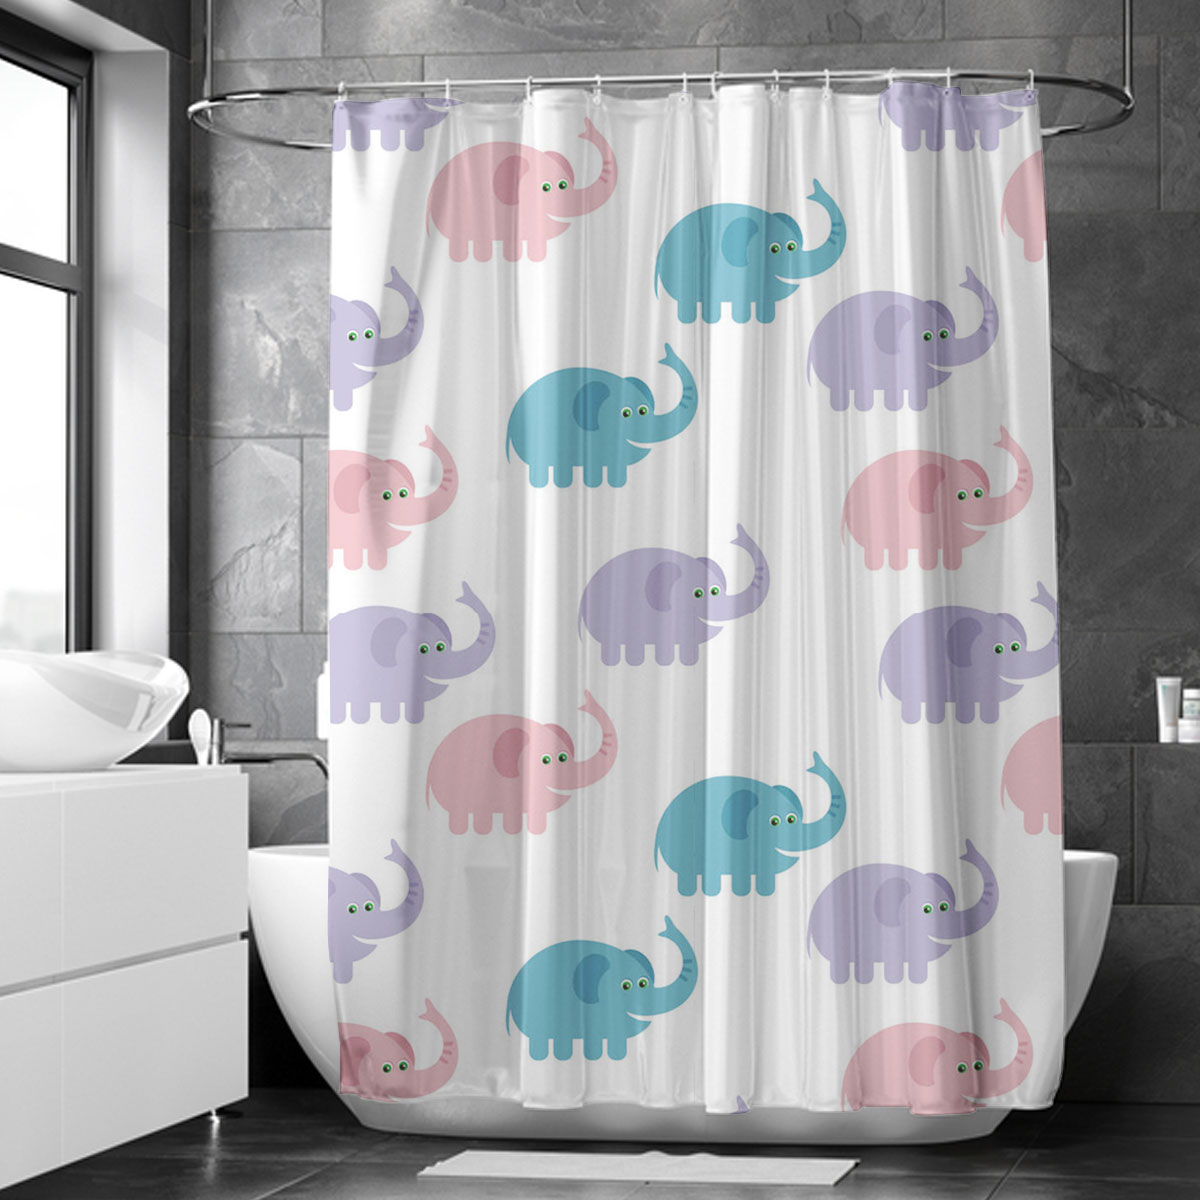 Big Colorful African Elephant Shower Curtain 6